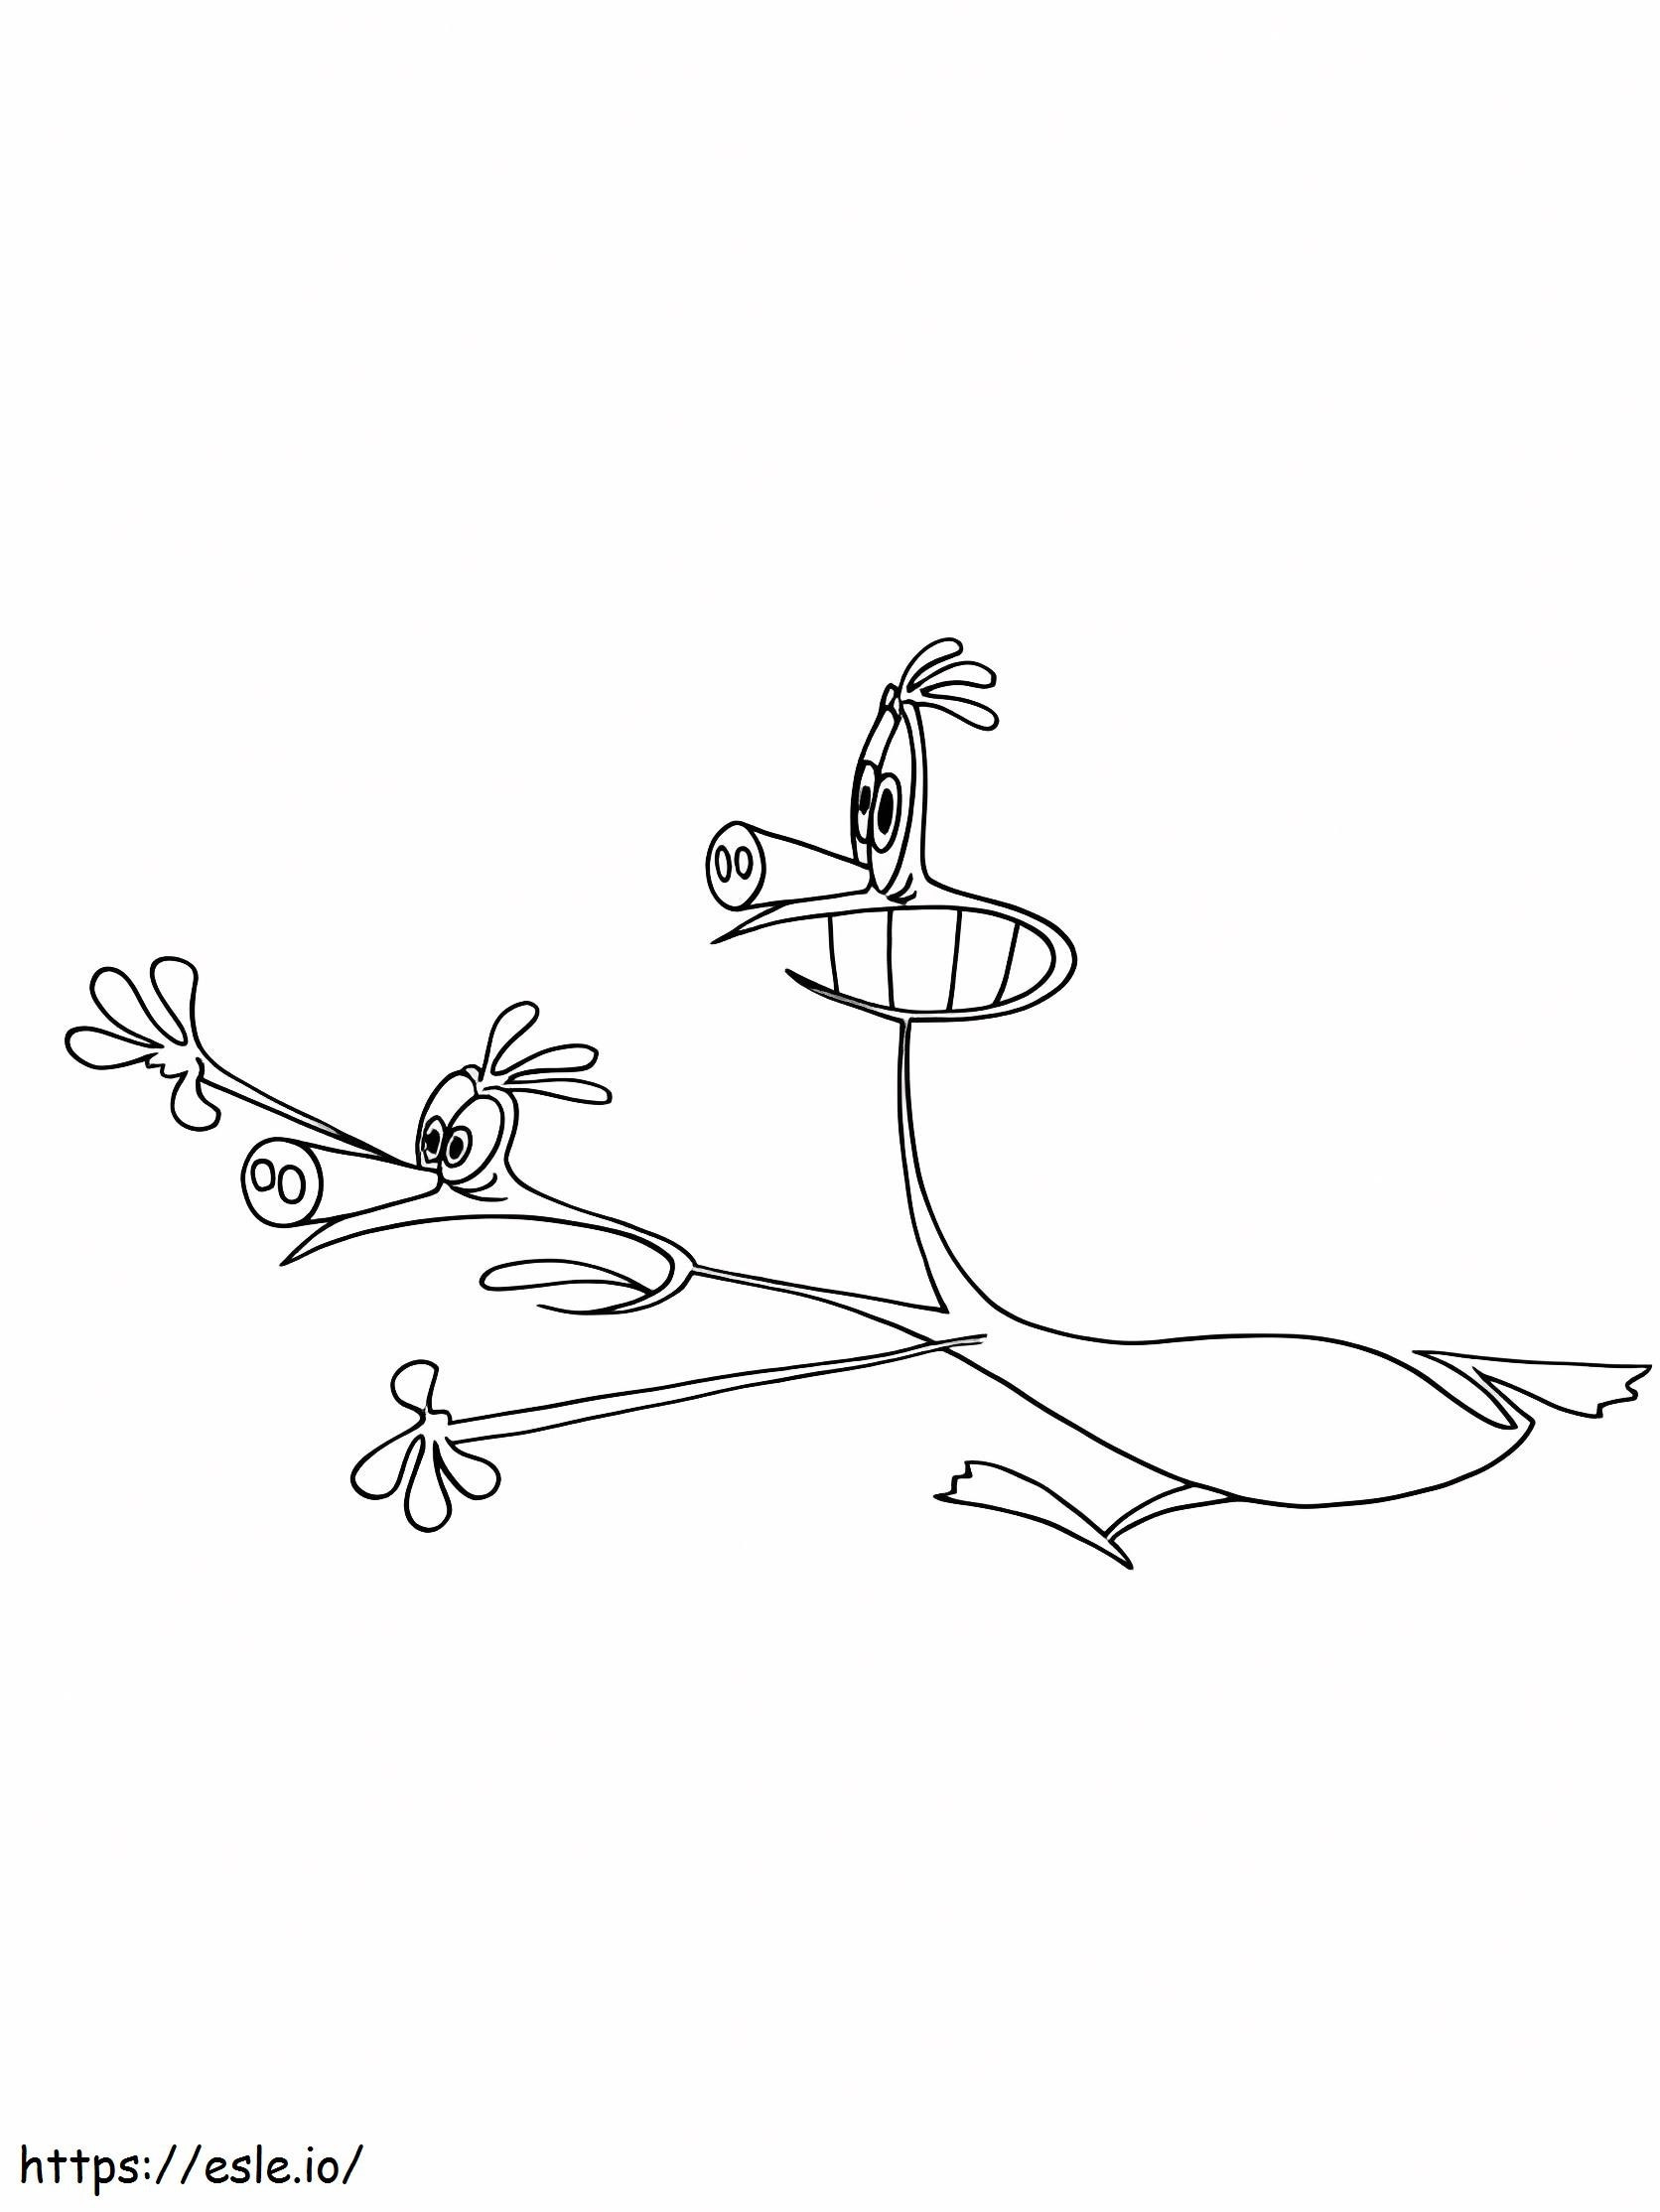 Running Stereo Monovici coloring page